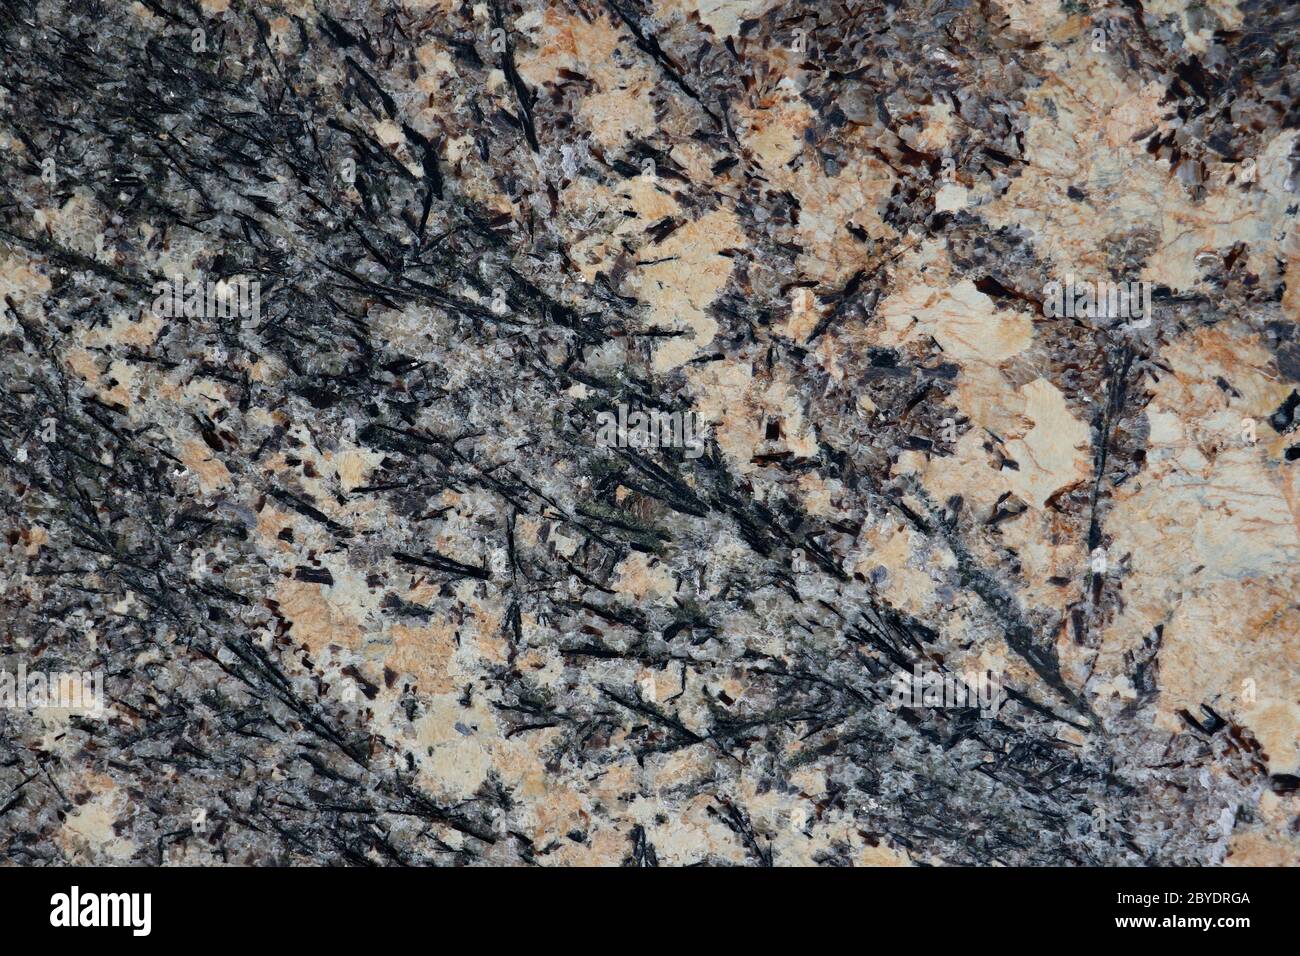 White marble used to make black textured pattern background. Stock Photo